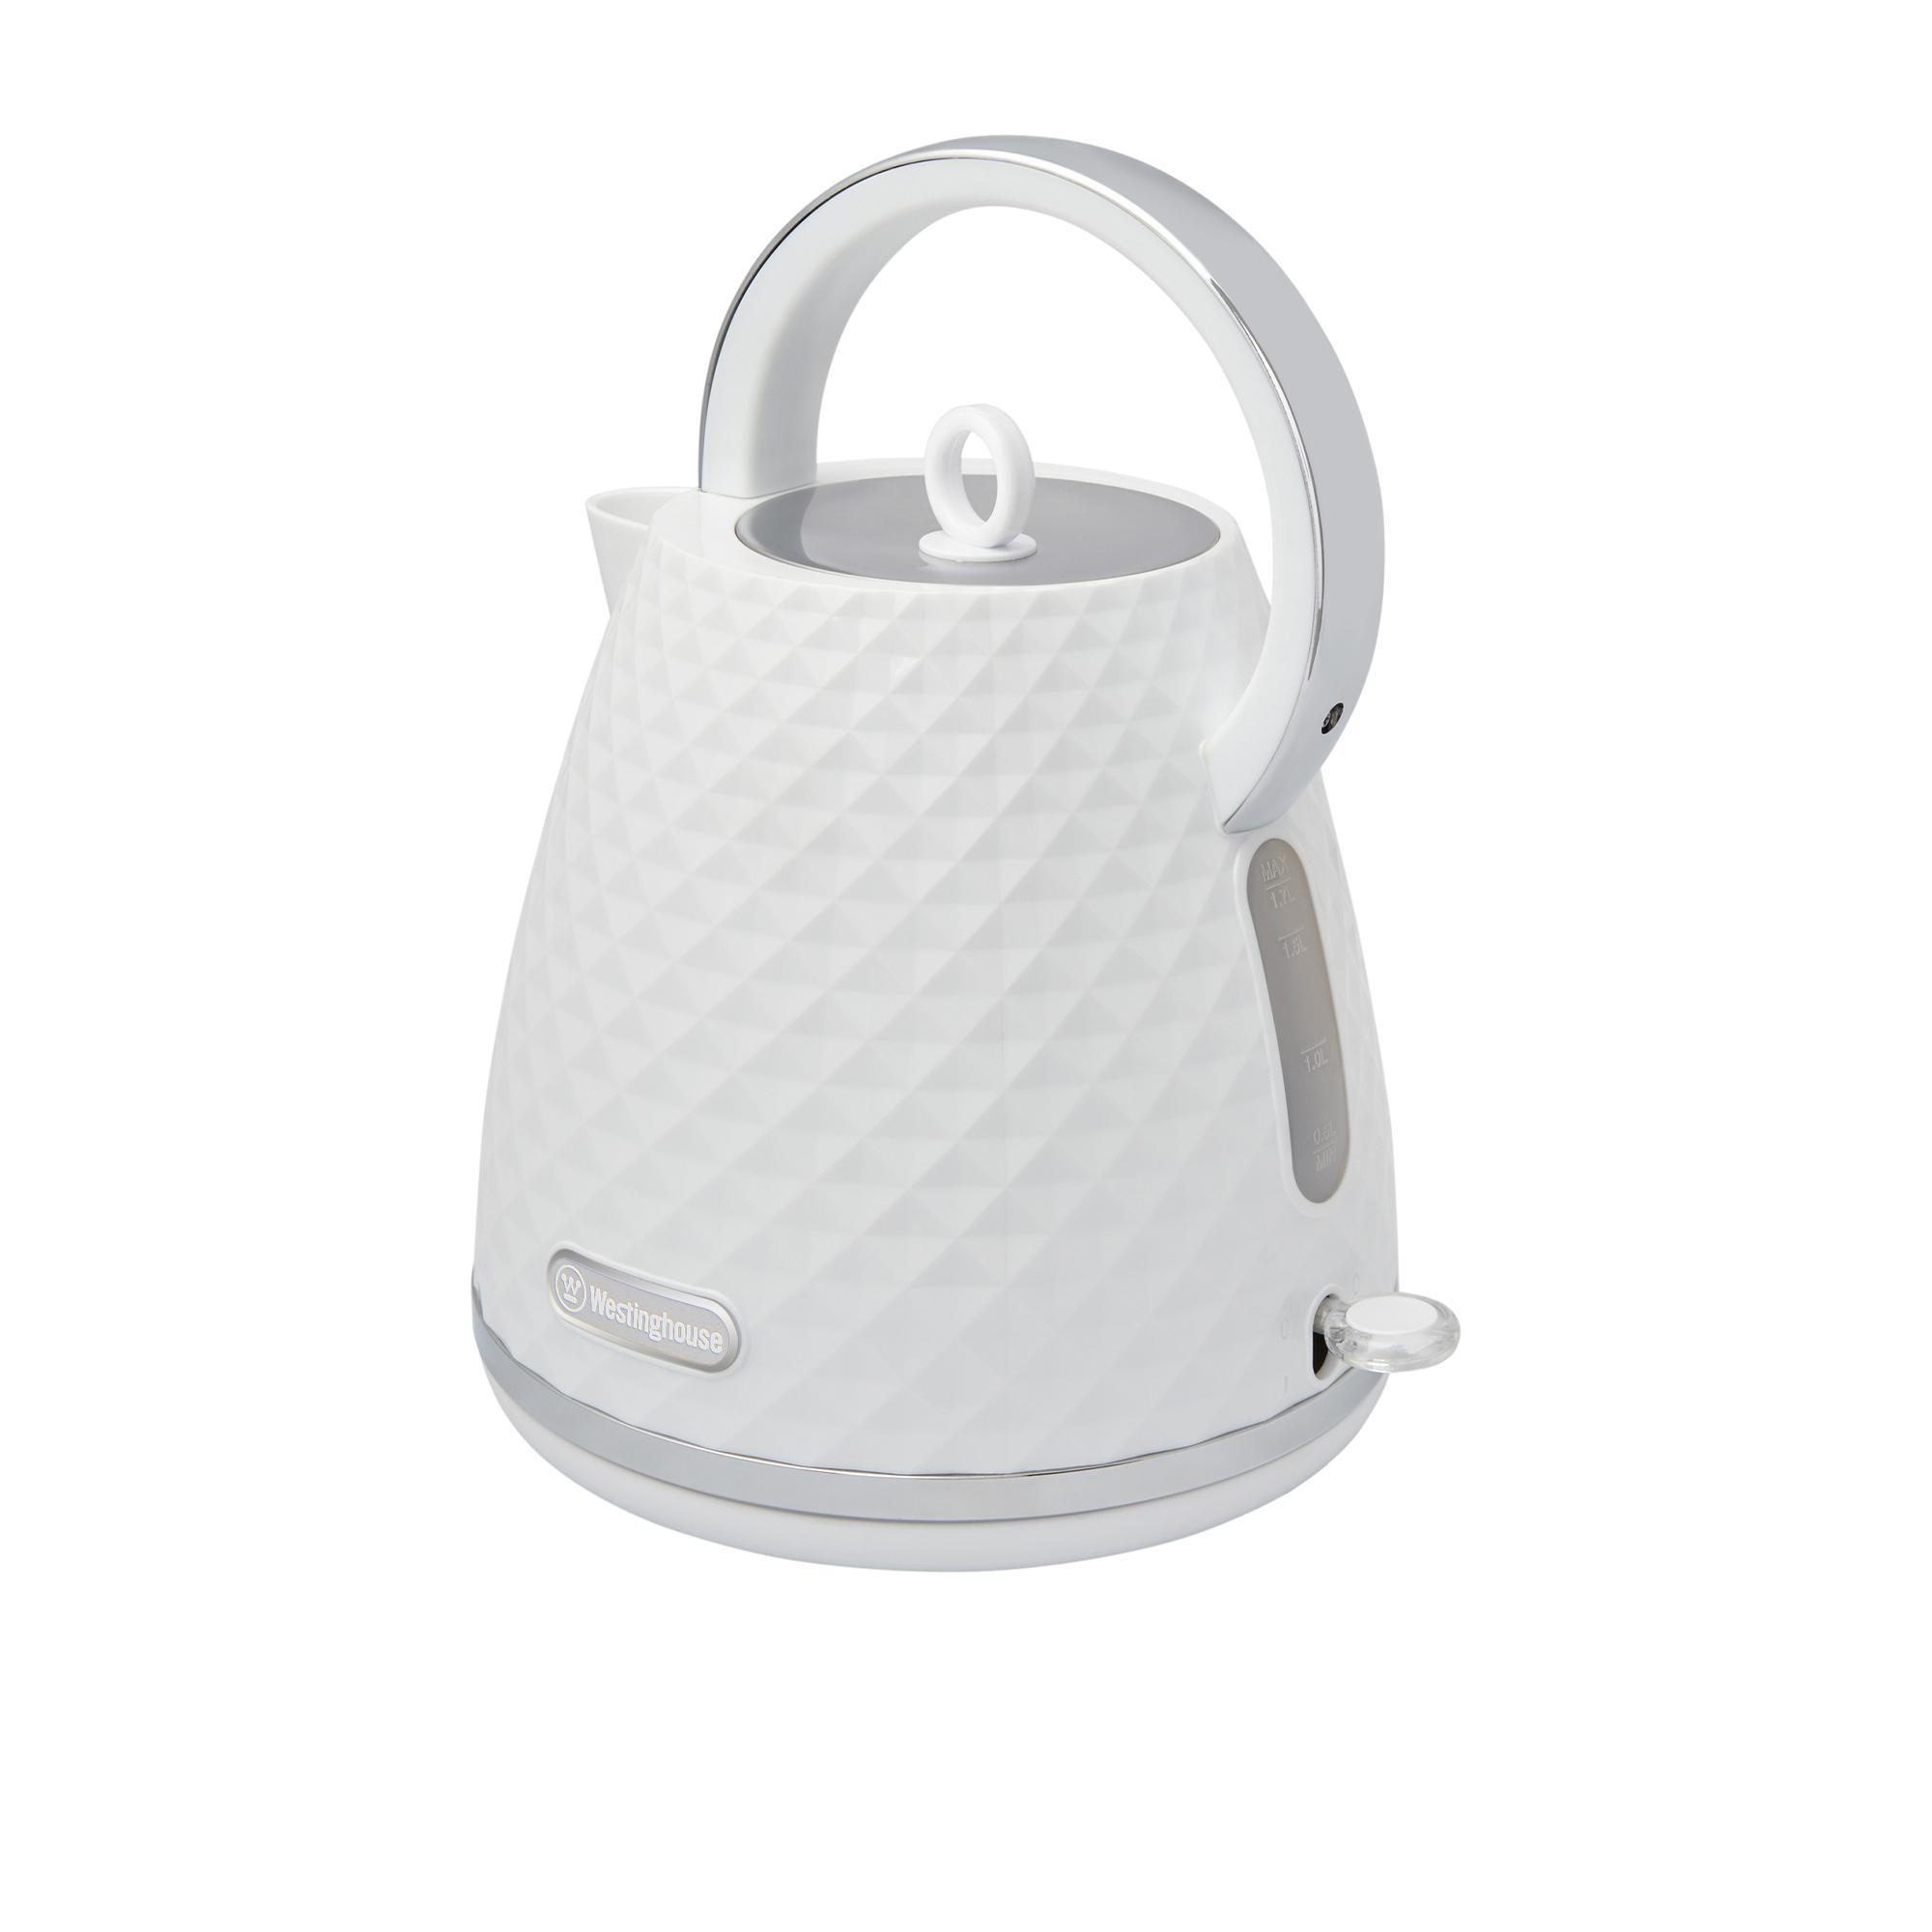 Westinghouse Kettle and Toaster Pack White - Diamond Pattern Image 4